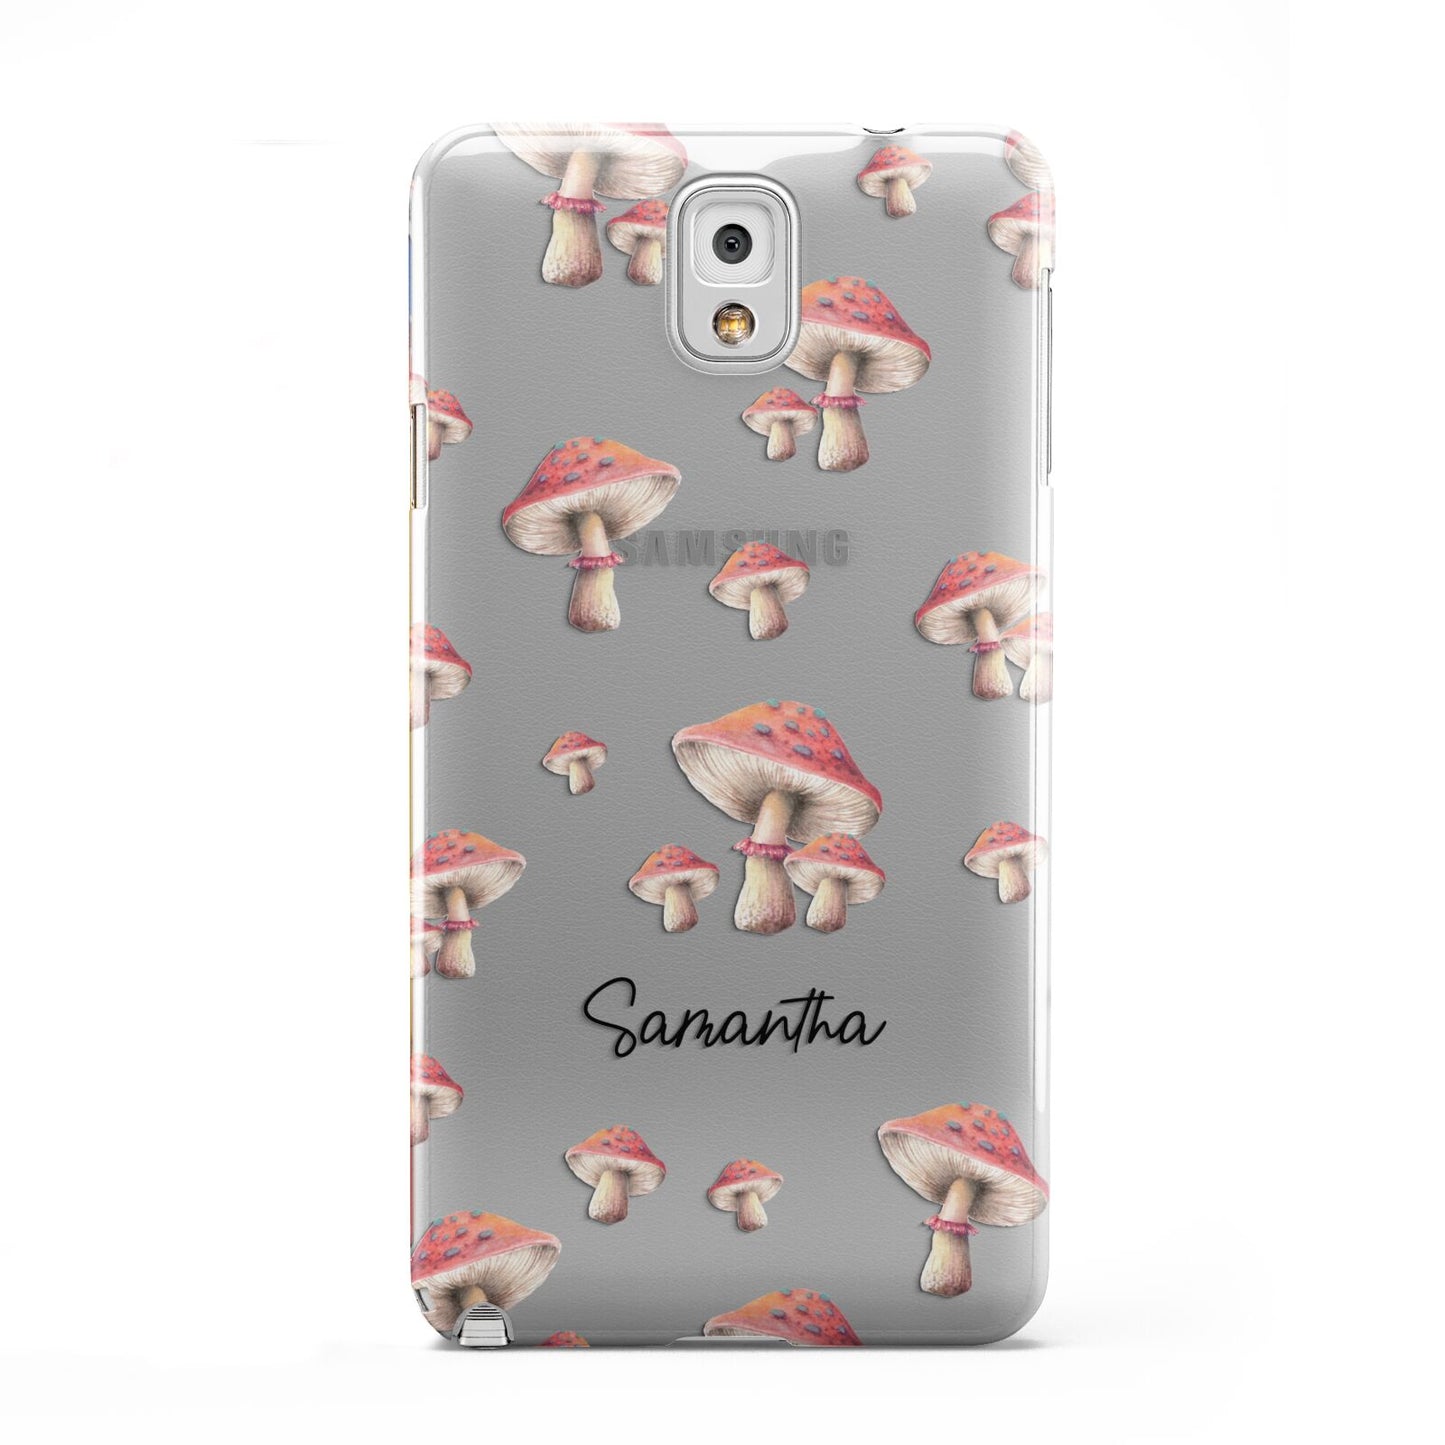 Mushroom Illustrations with Name Samsung Galaxy Note 3 Case